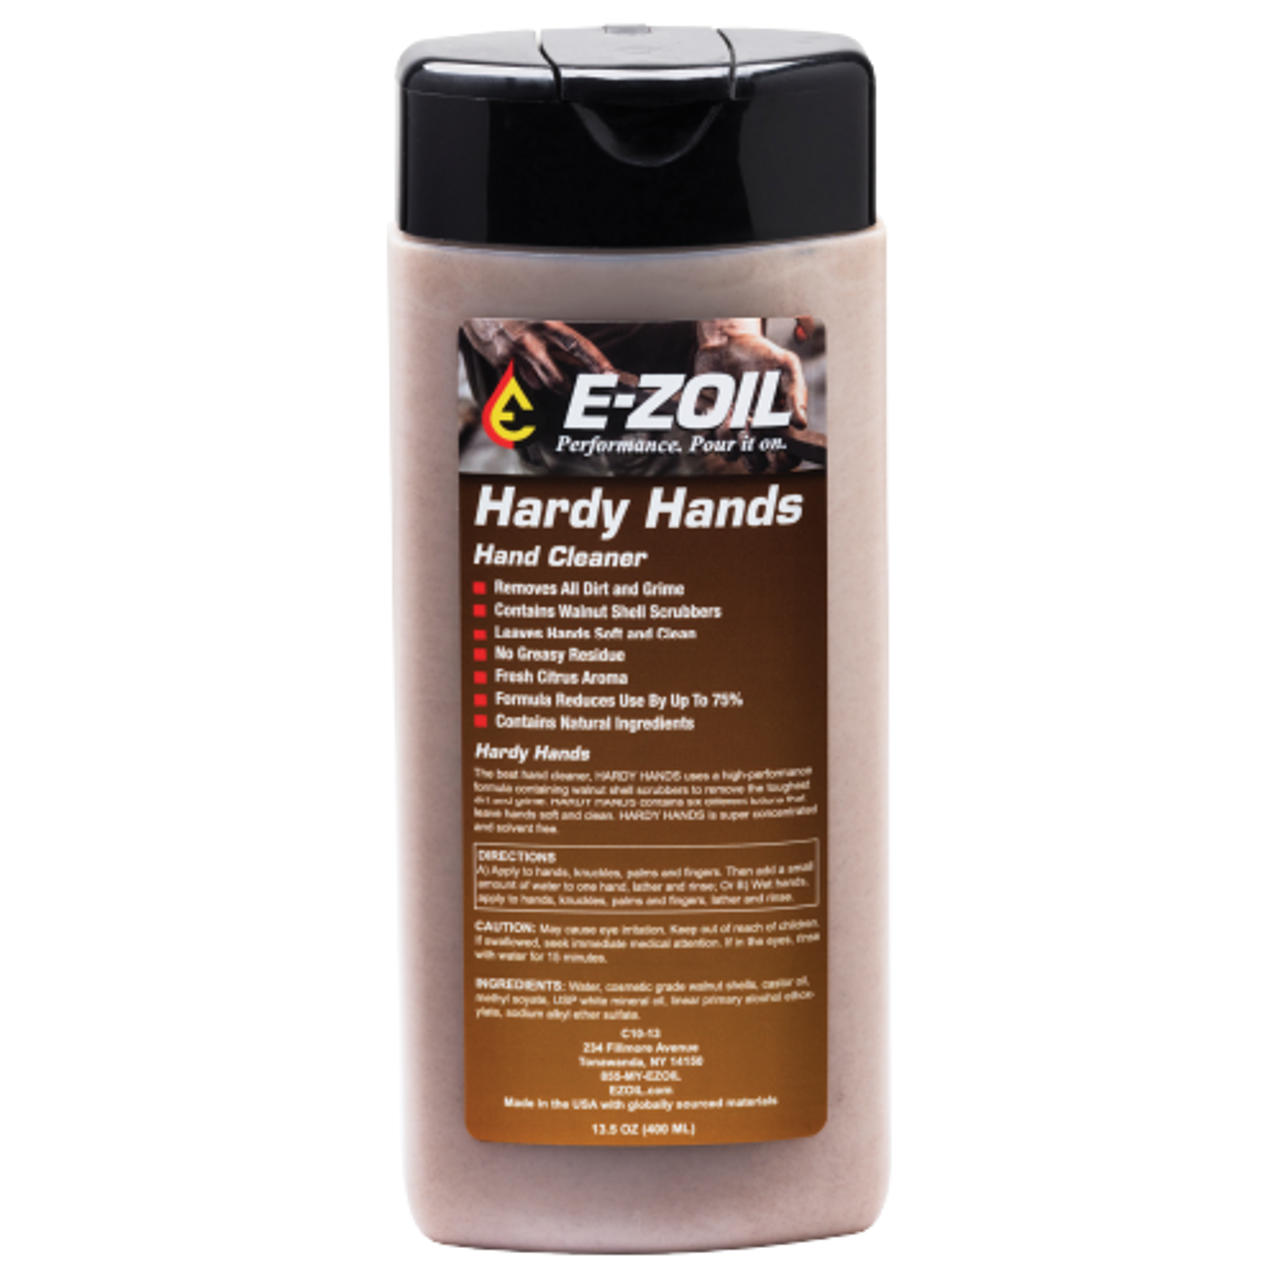 E-Zoil Hardy Hands Hand Cleaner- 13oz Squeeze Tube